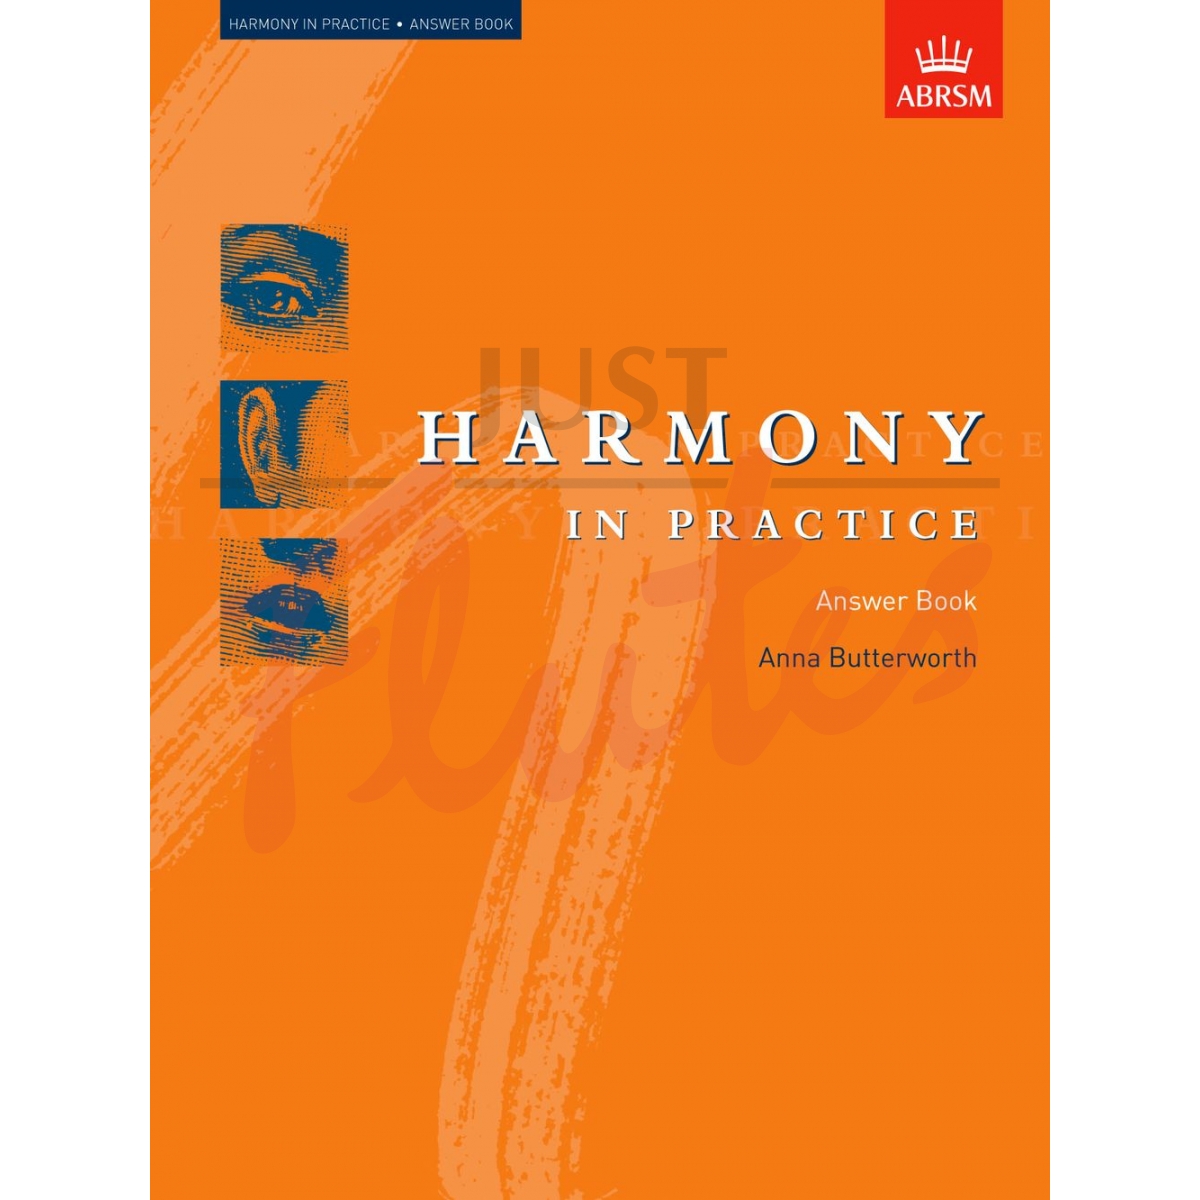 Harmony in Practice [Answer Book]